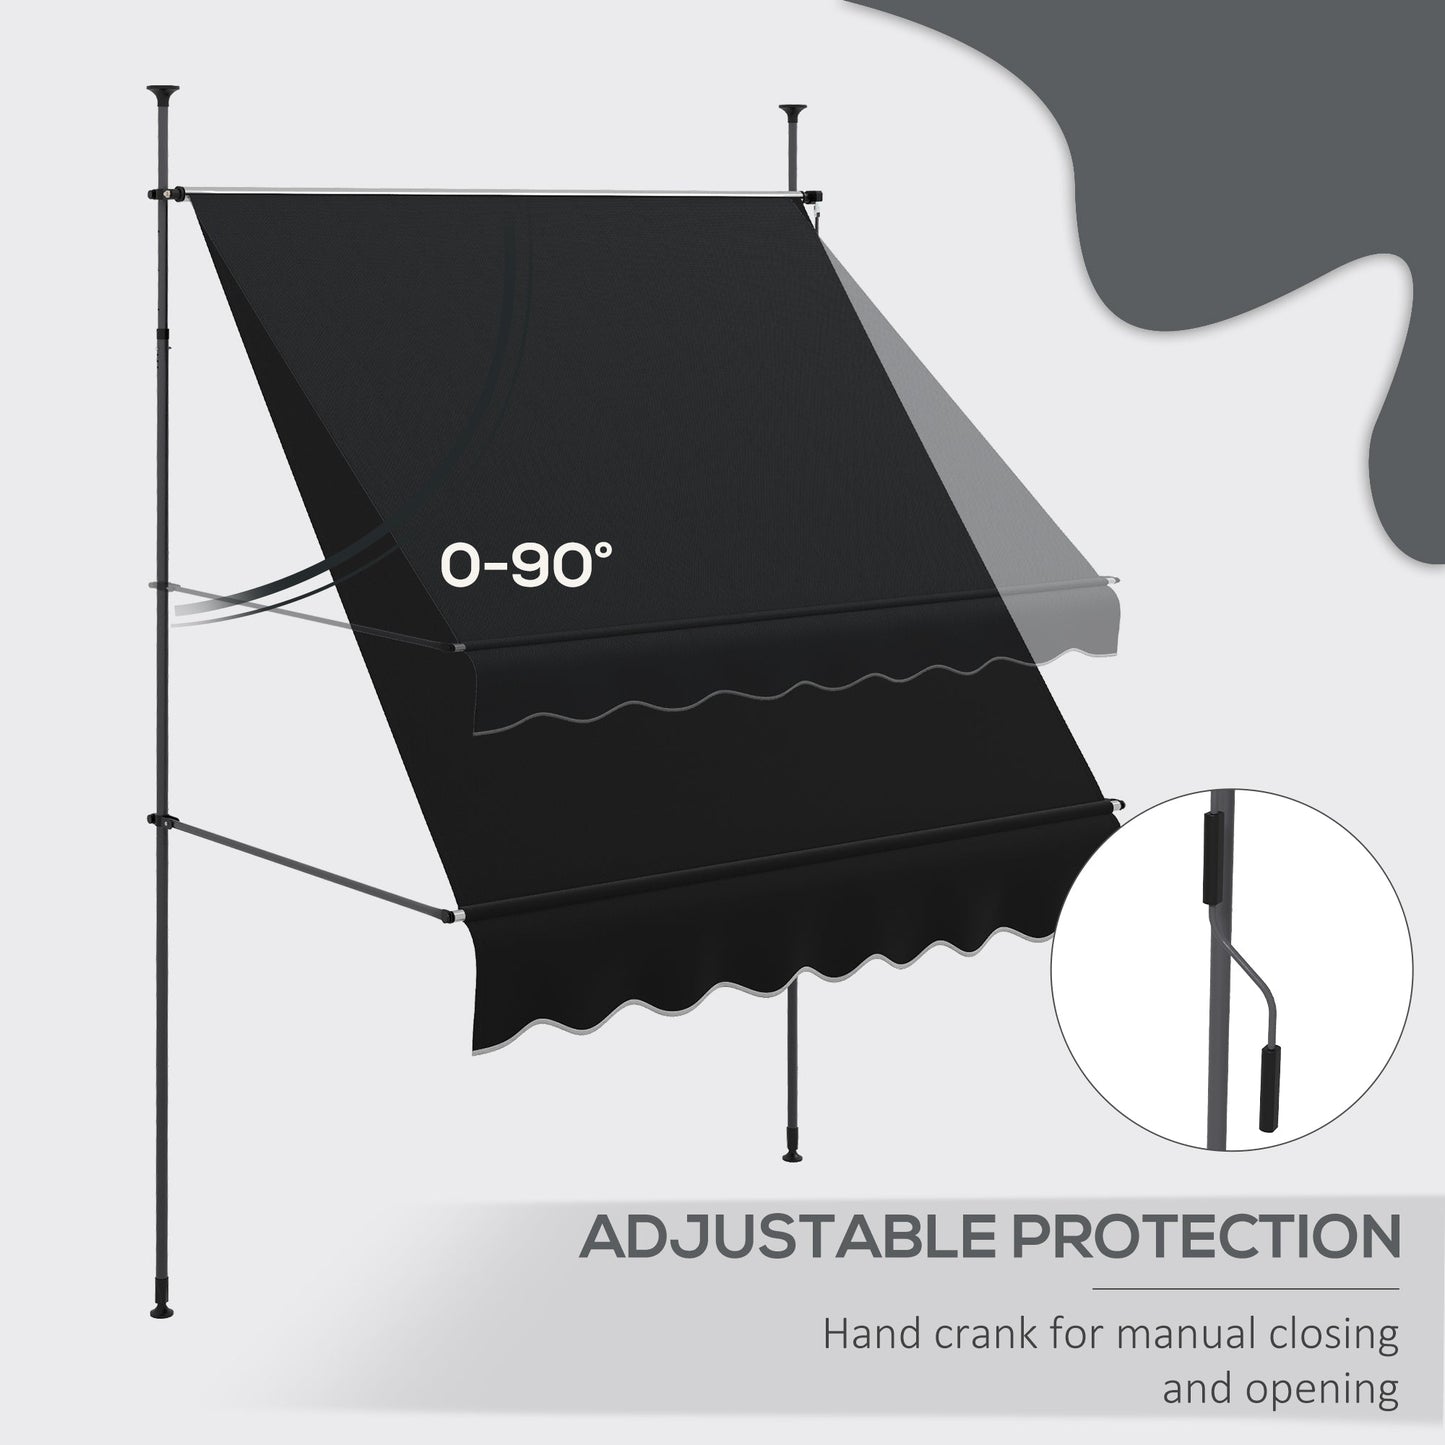 -Outsunny 6.5' x 4' Manual Retractable Awning, Non-Screw Freestanding Patio Awning, UV Resistant, for Window or Door, Black - Outdoor Style Company